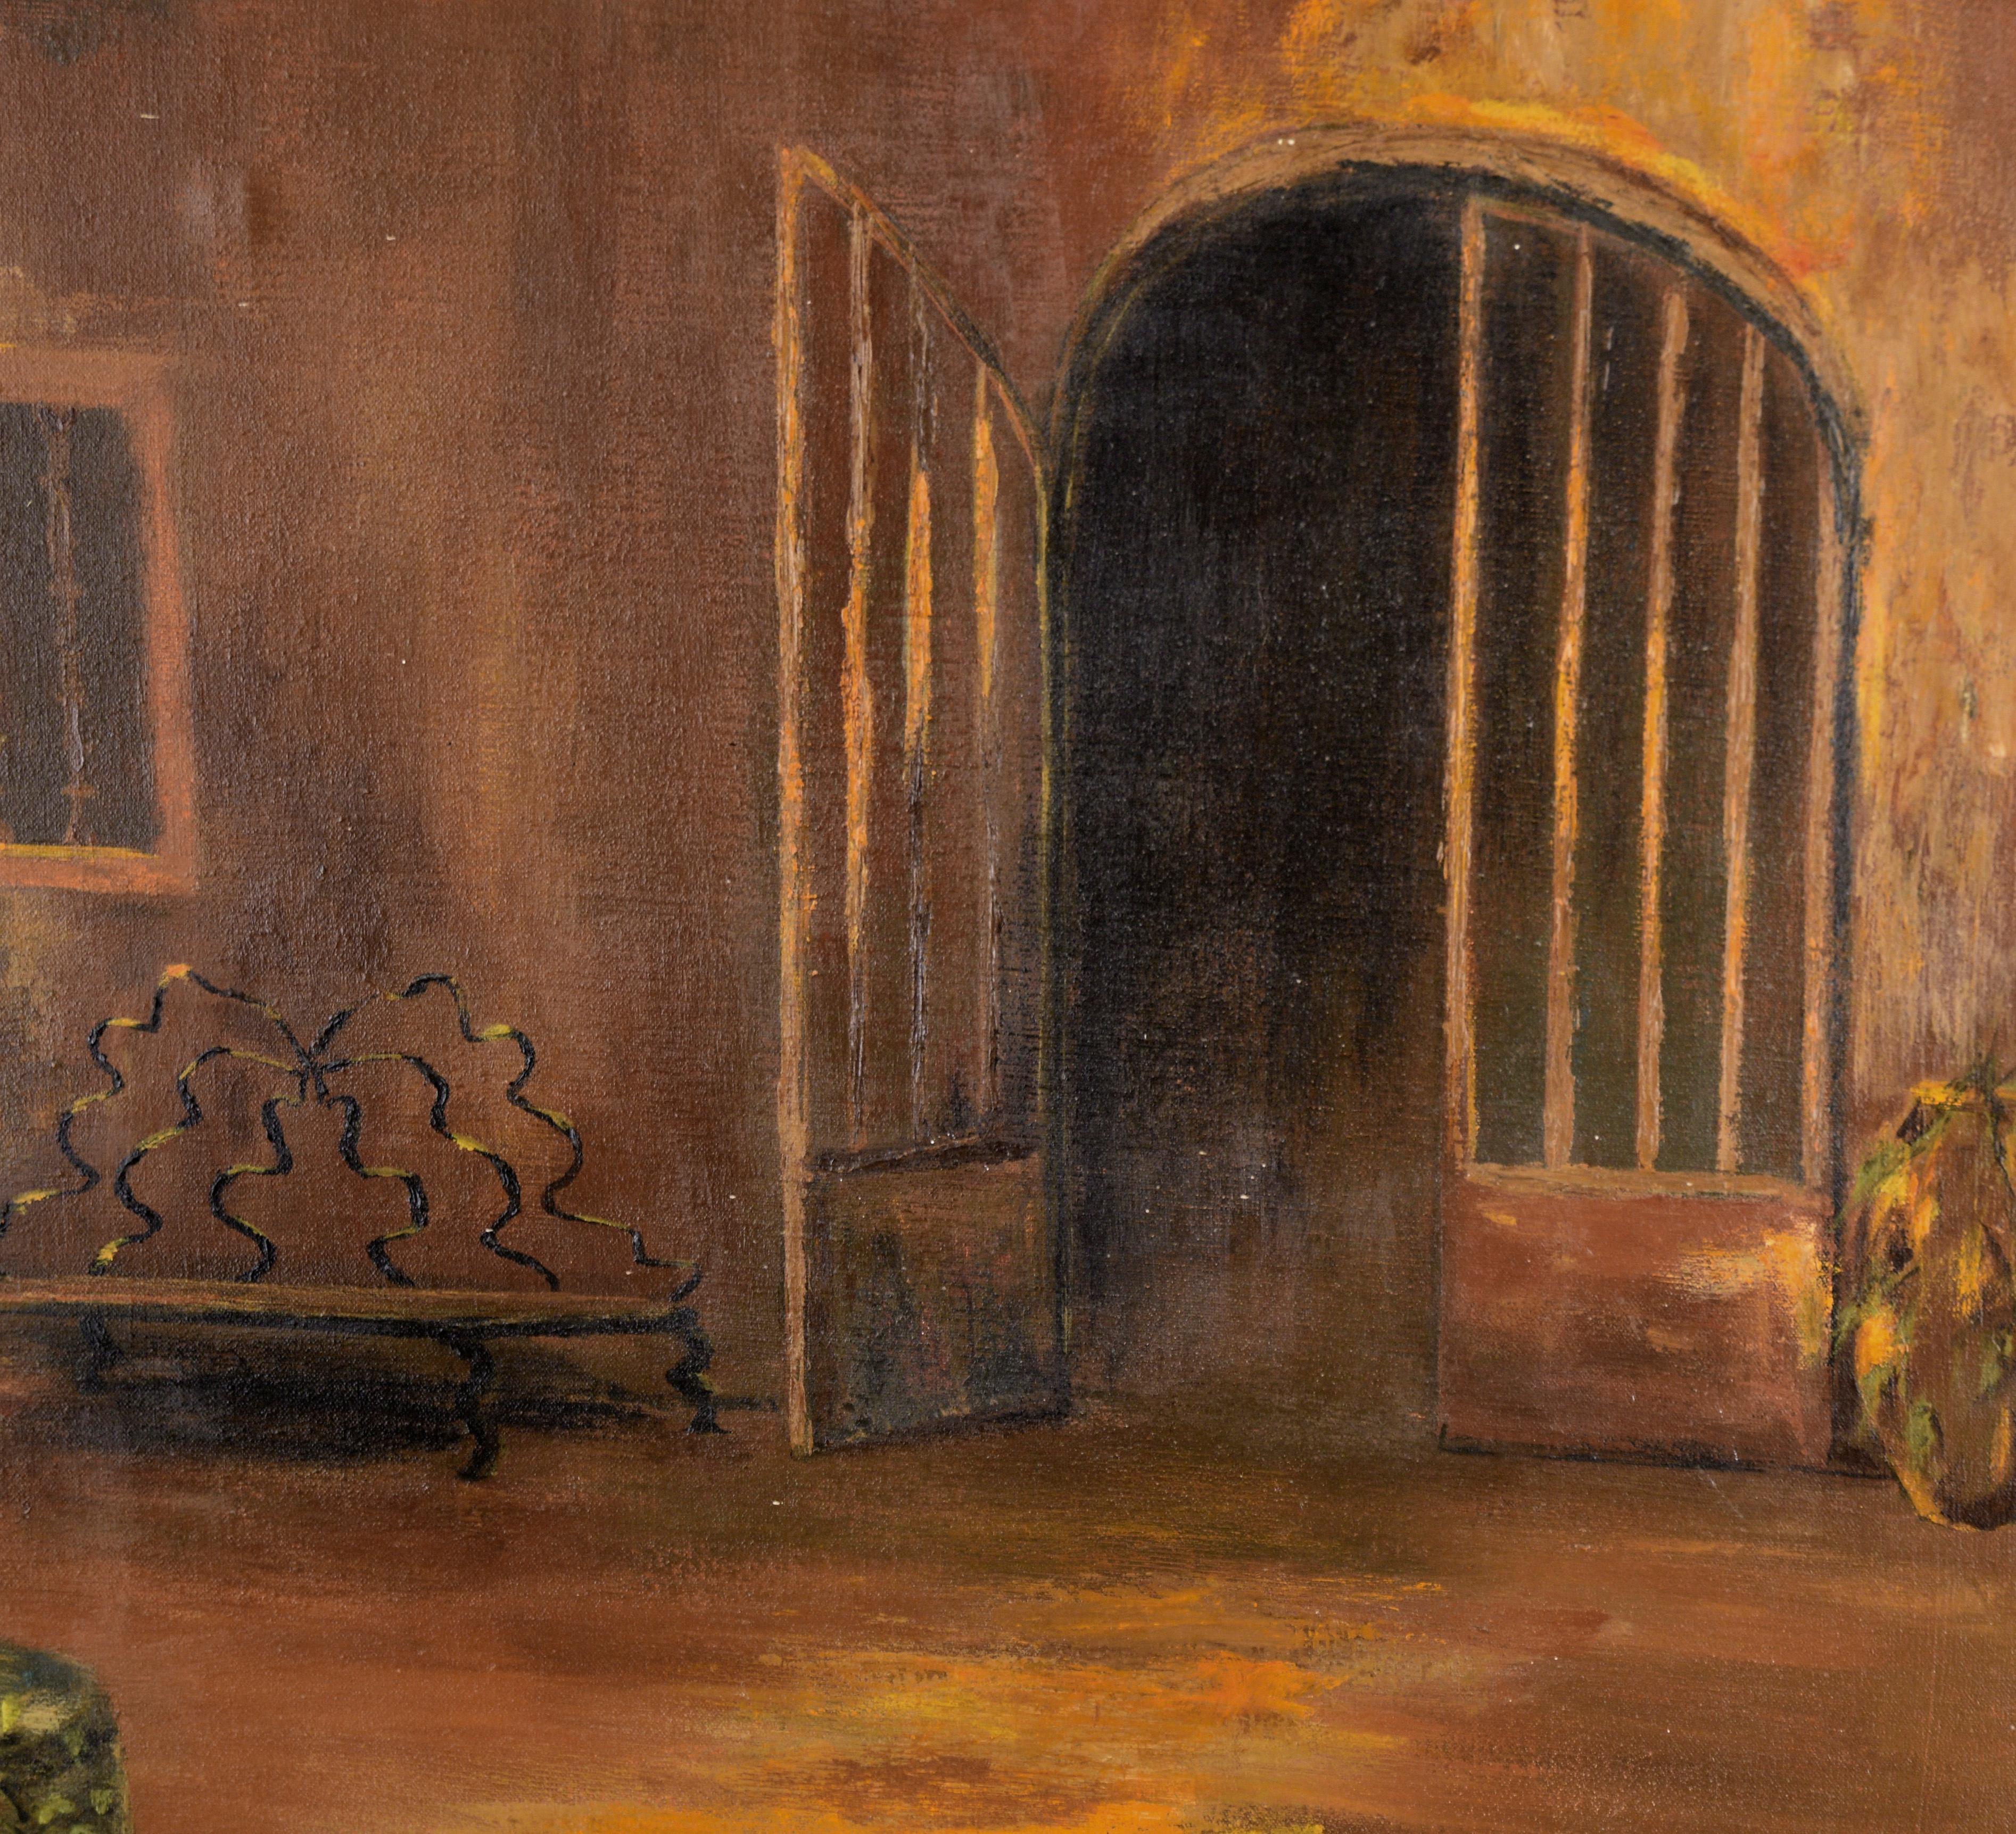 Courtyard with Fountain - Interior Landscape in Oil on Canvas

Moody interior scene by Muriel Kittock (American, 1919-1996). Against a far wall, there is an ornate bench with a metal back. The wall also has large double gate. In the foreground,